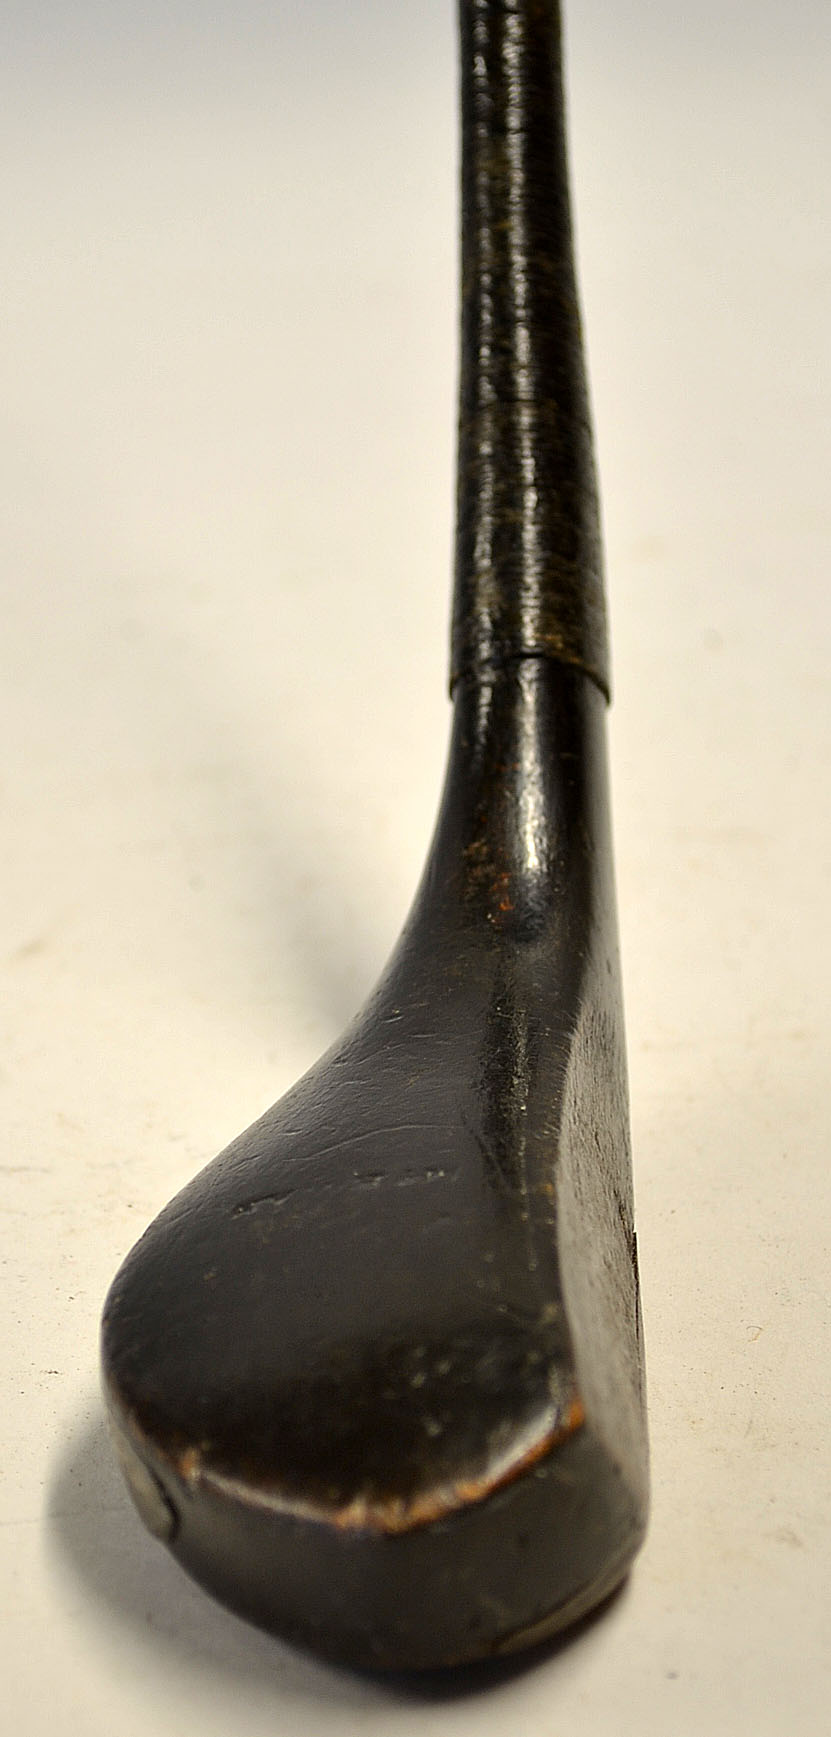 Early McEwan dark stained longnose beech wood hooked face grass driver c.1865 - the head measures